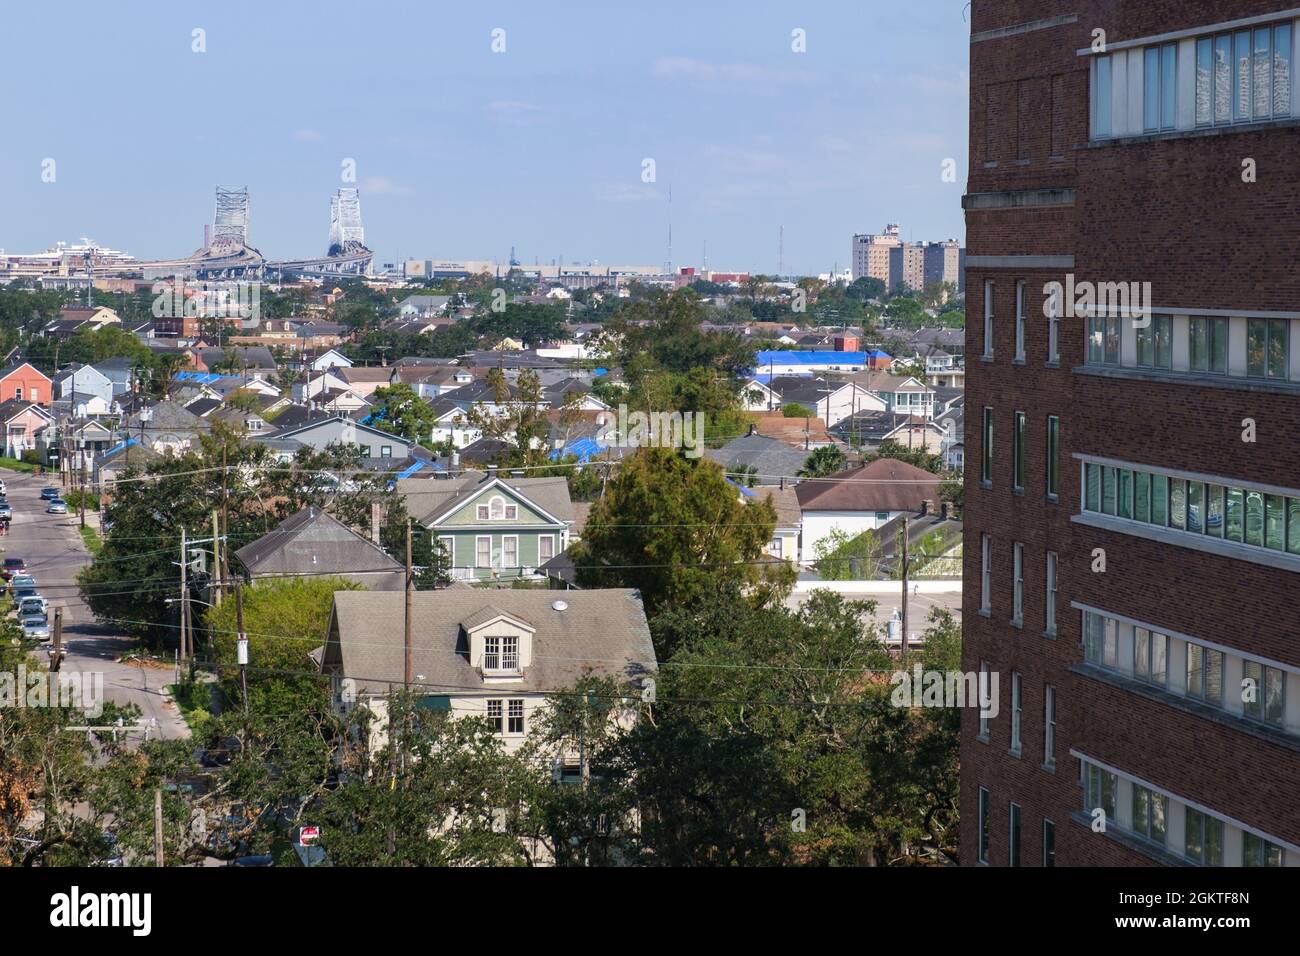 NEW ORLEANS, LA, USA - SEPTEMBER 11, 2021: Aerial view of Uptown Neighborhood in the aftermath of Hurricane Ida showing damaged roofs with blue tarps Stock Photo